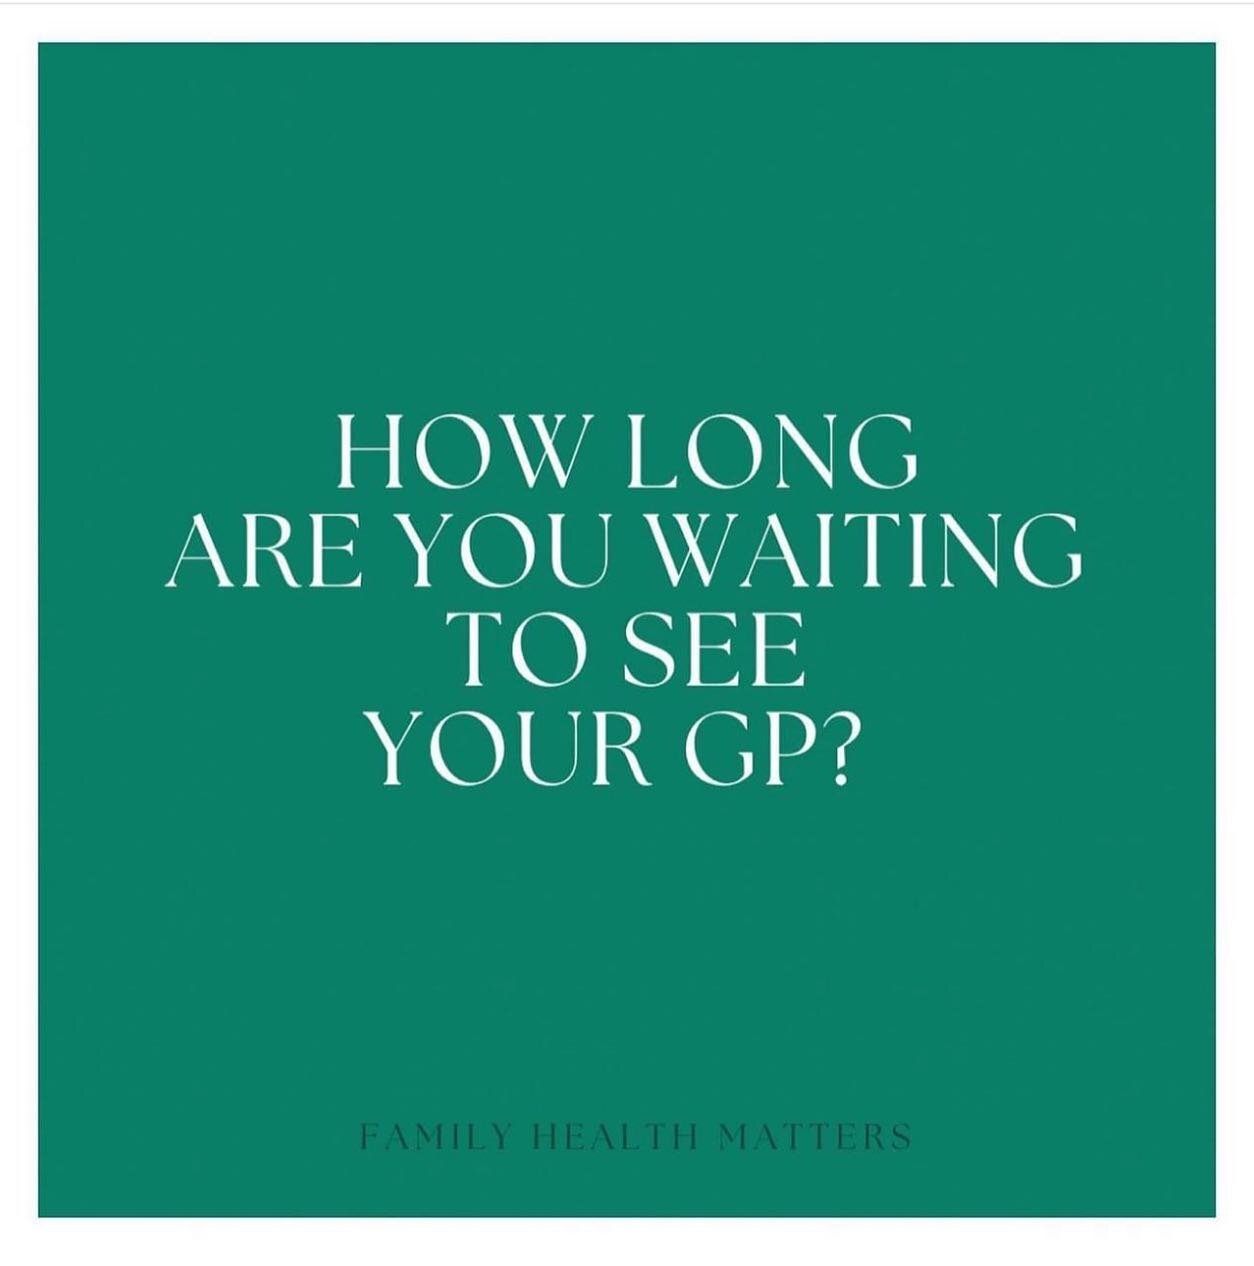 Like the rest of the health sector, GPs are overwhelmed and under pressure, resulting in longer wait times to be seen. We are pleased to offer same day appointments (if you call first thing in the morning) and wait times of no more than 15 minutes! T